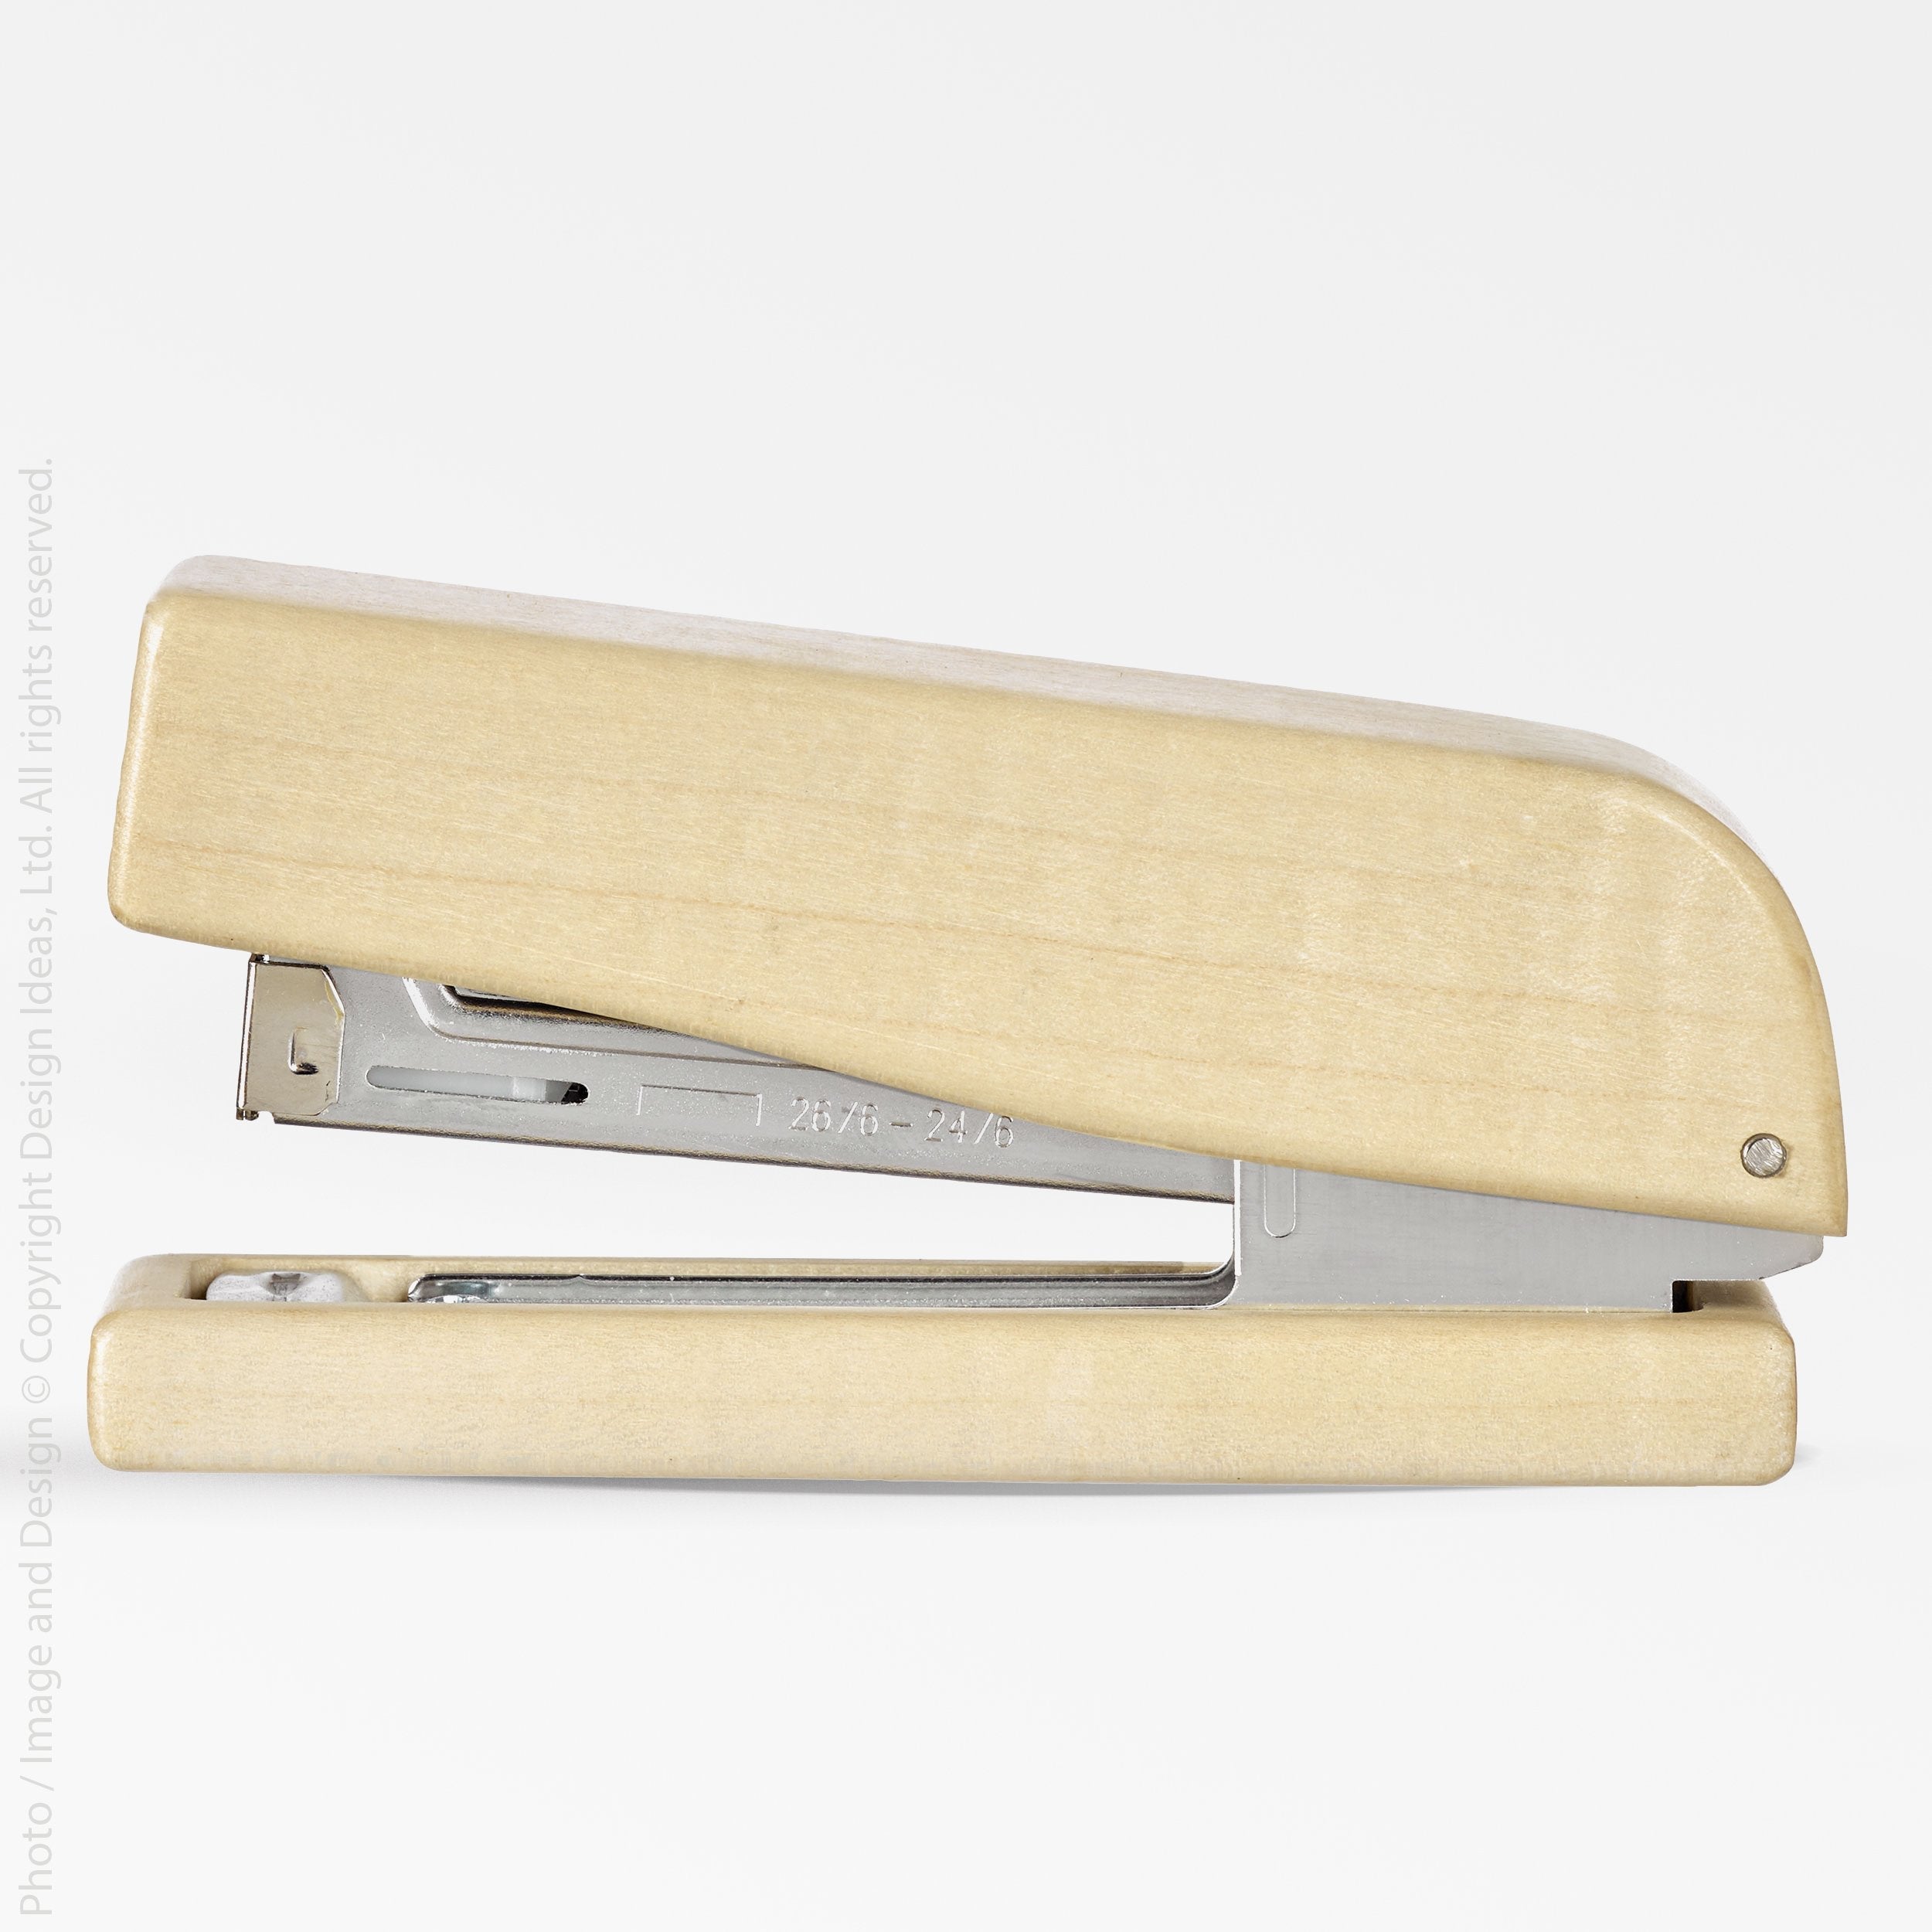 Upland Sycamore Stapler - Natural Color | Image 1 | From the Upland Collection | Exquisitely crafted with natural sycamore for long lasting use | Available in natural color | texxture home